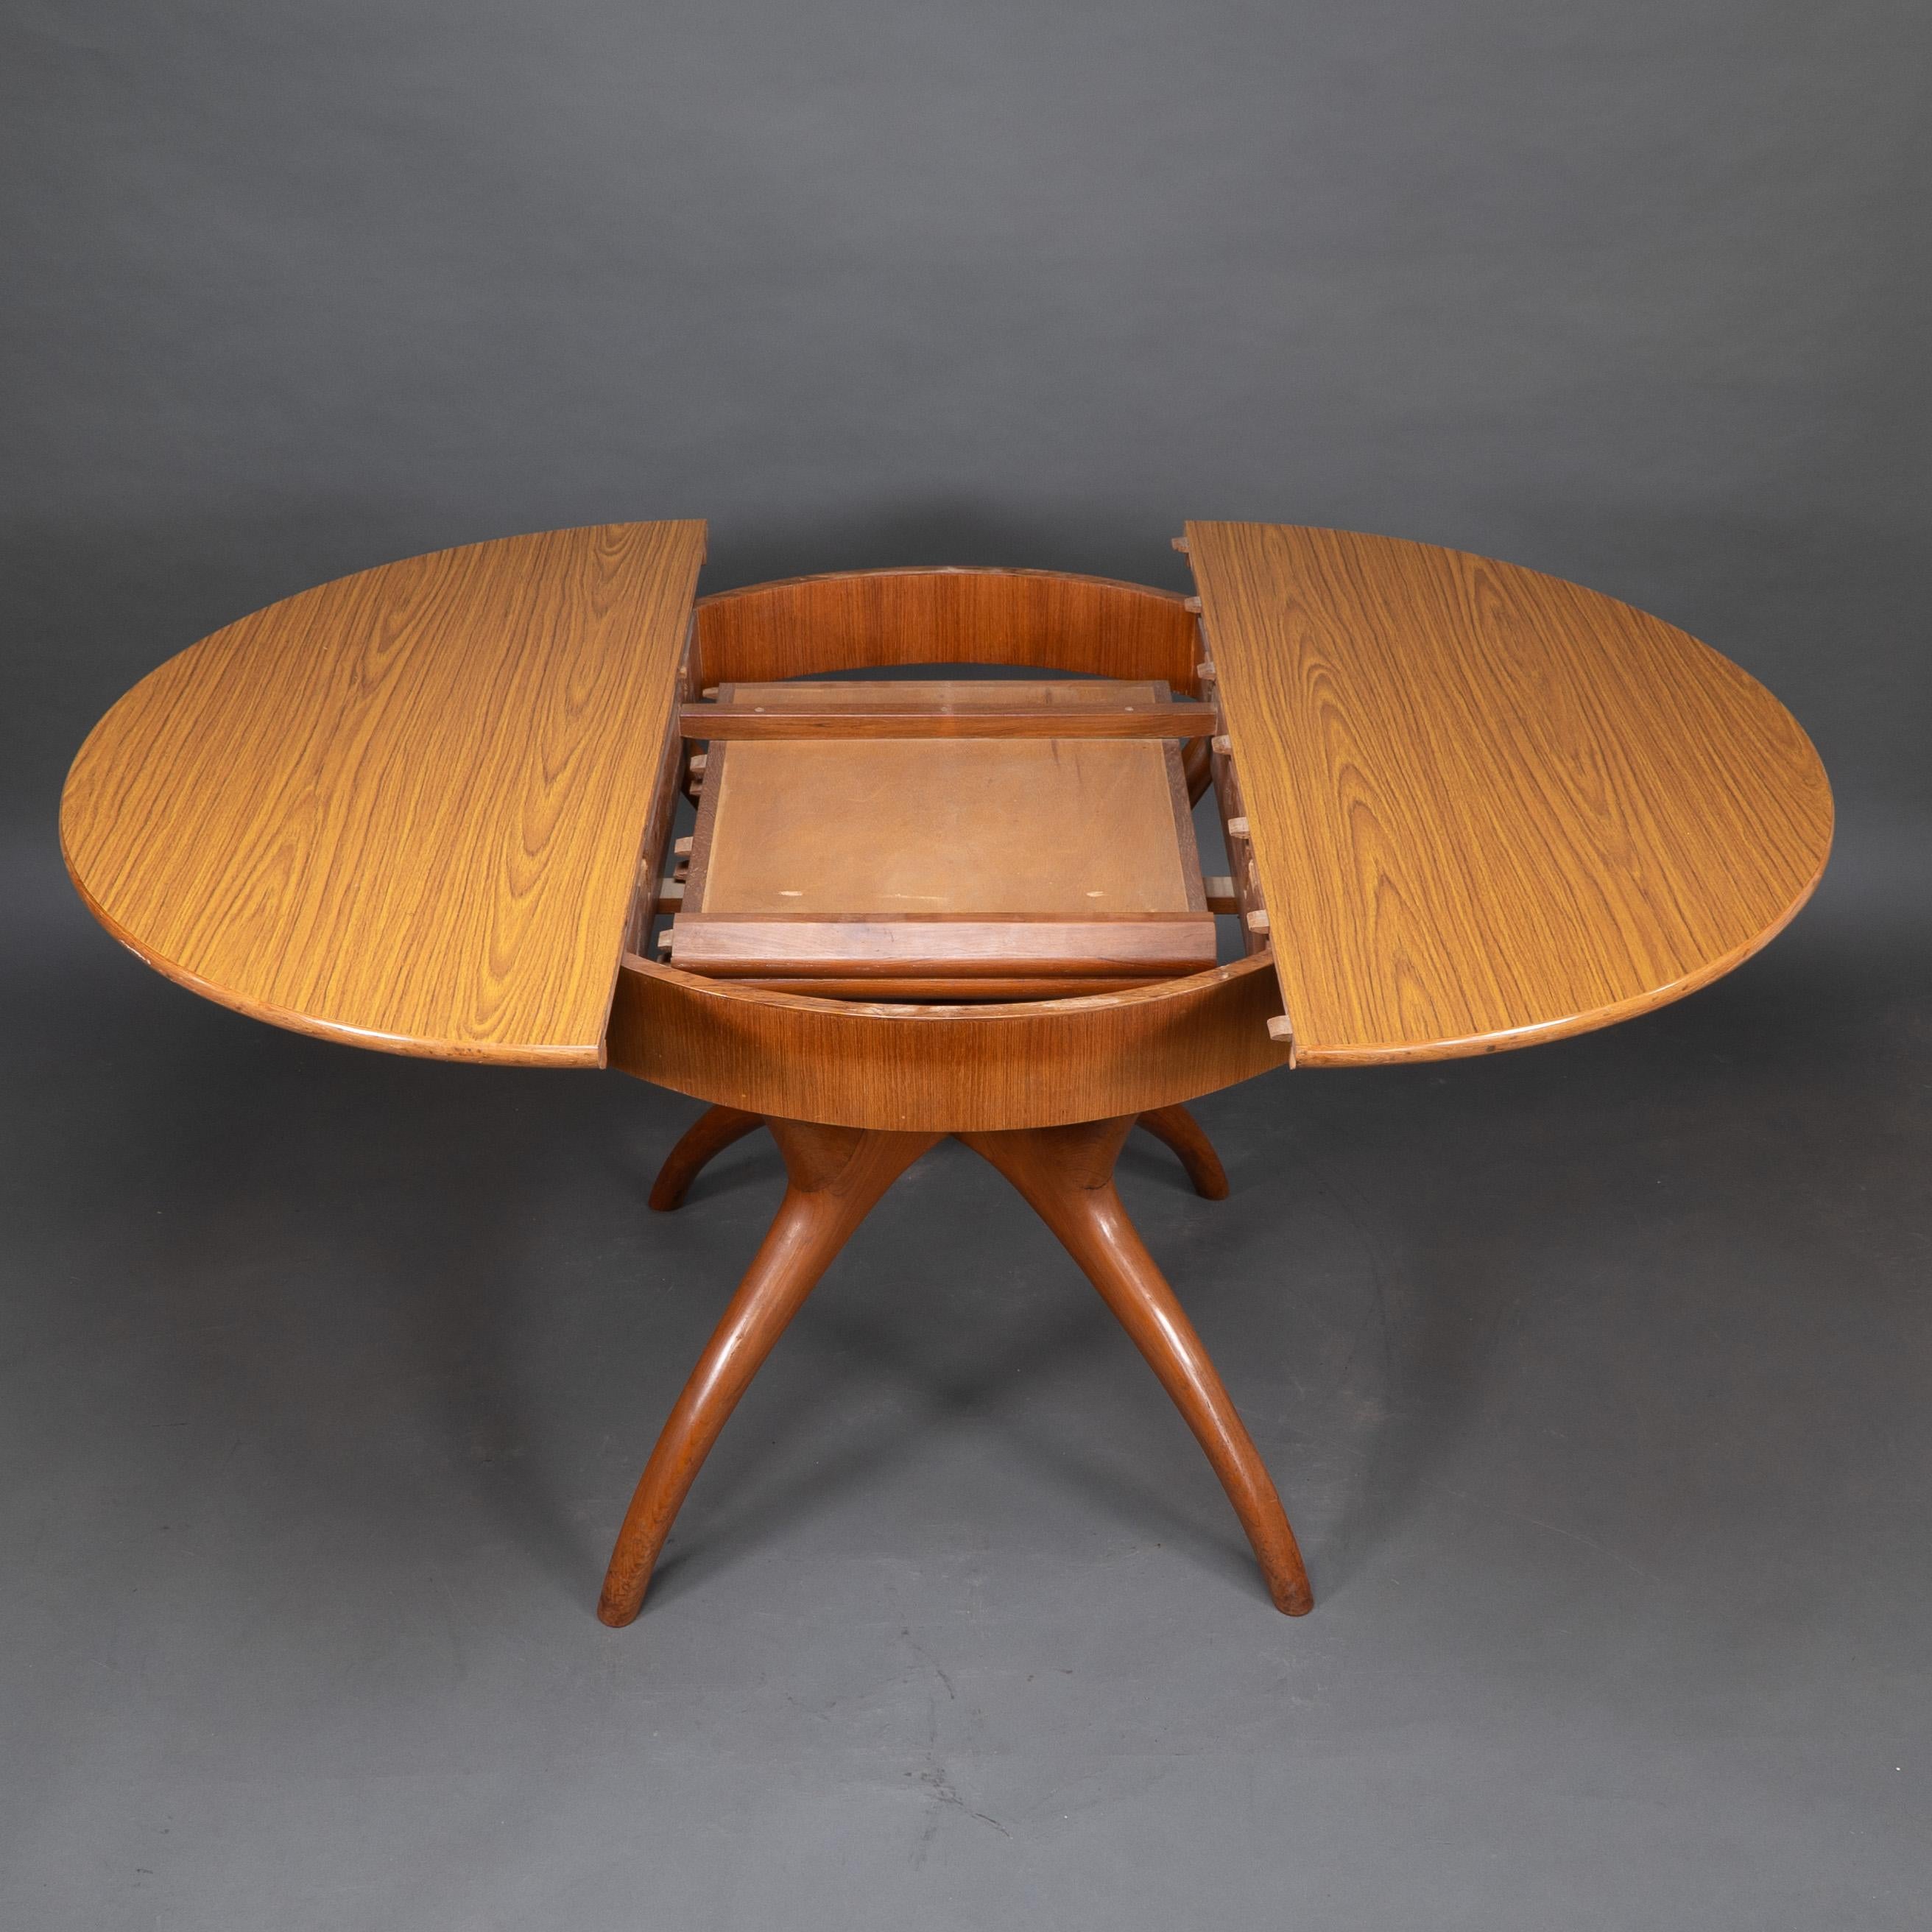 Late 20th Century Midcentury Teak Extending Dining Table with Organic Style Cross Frame Legs For Sale